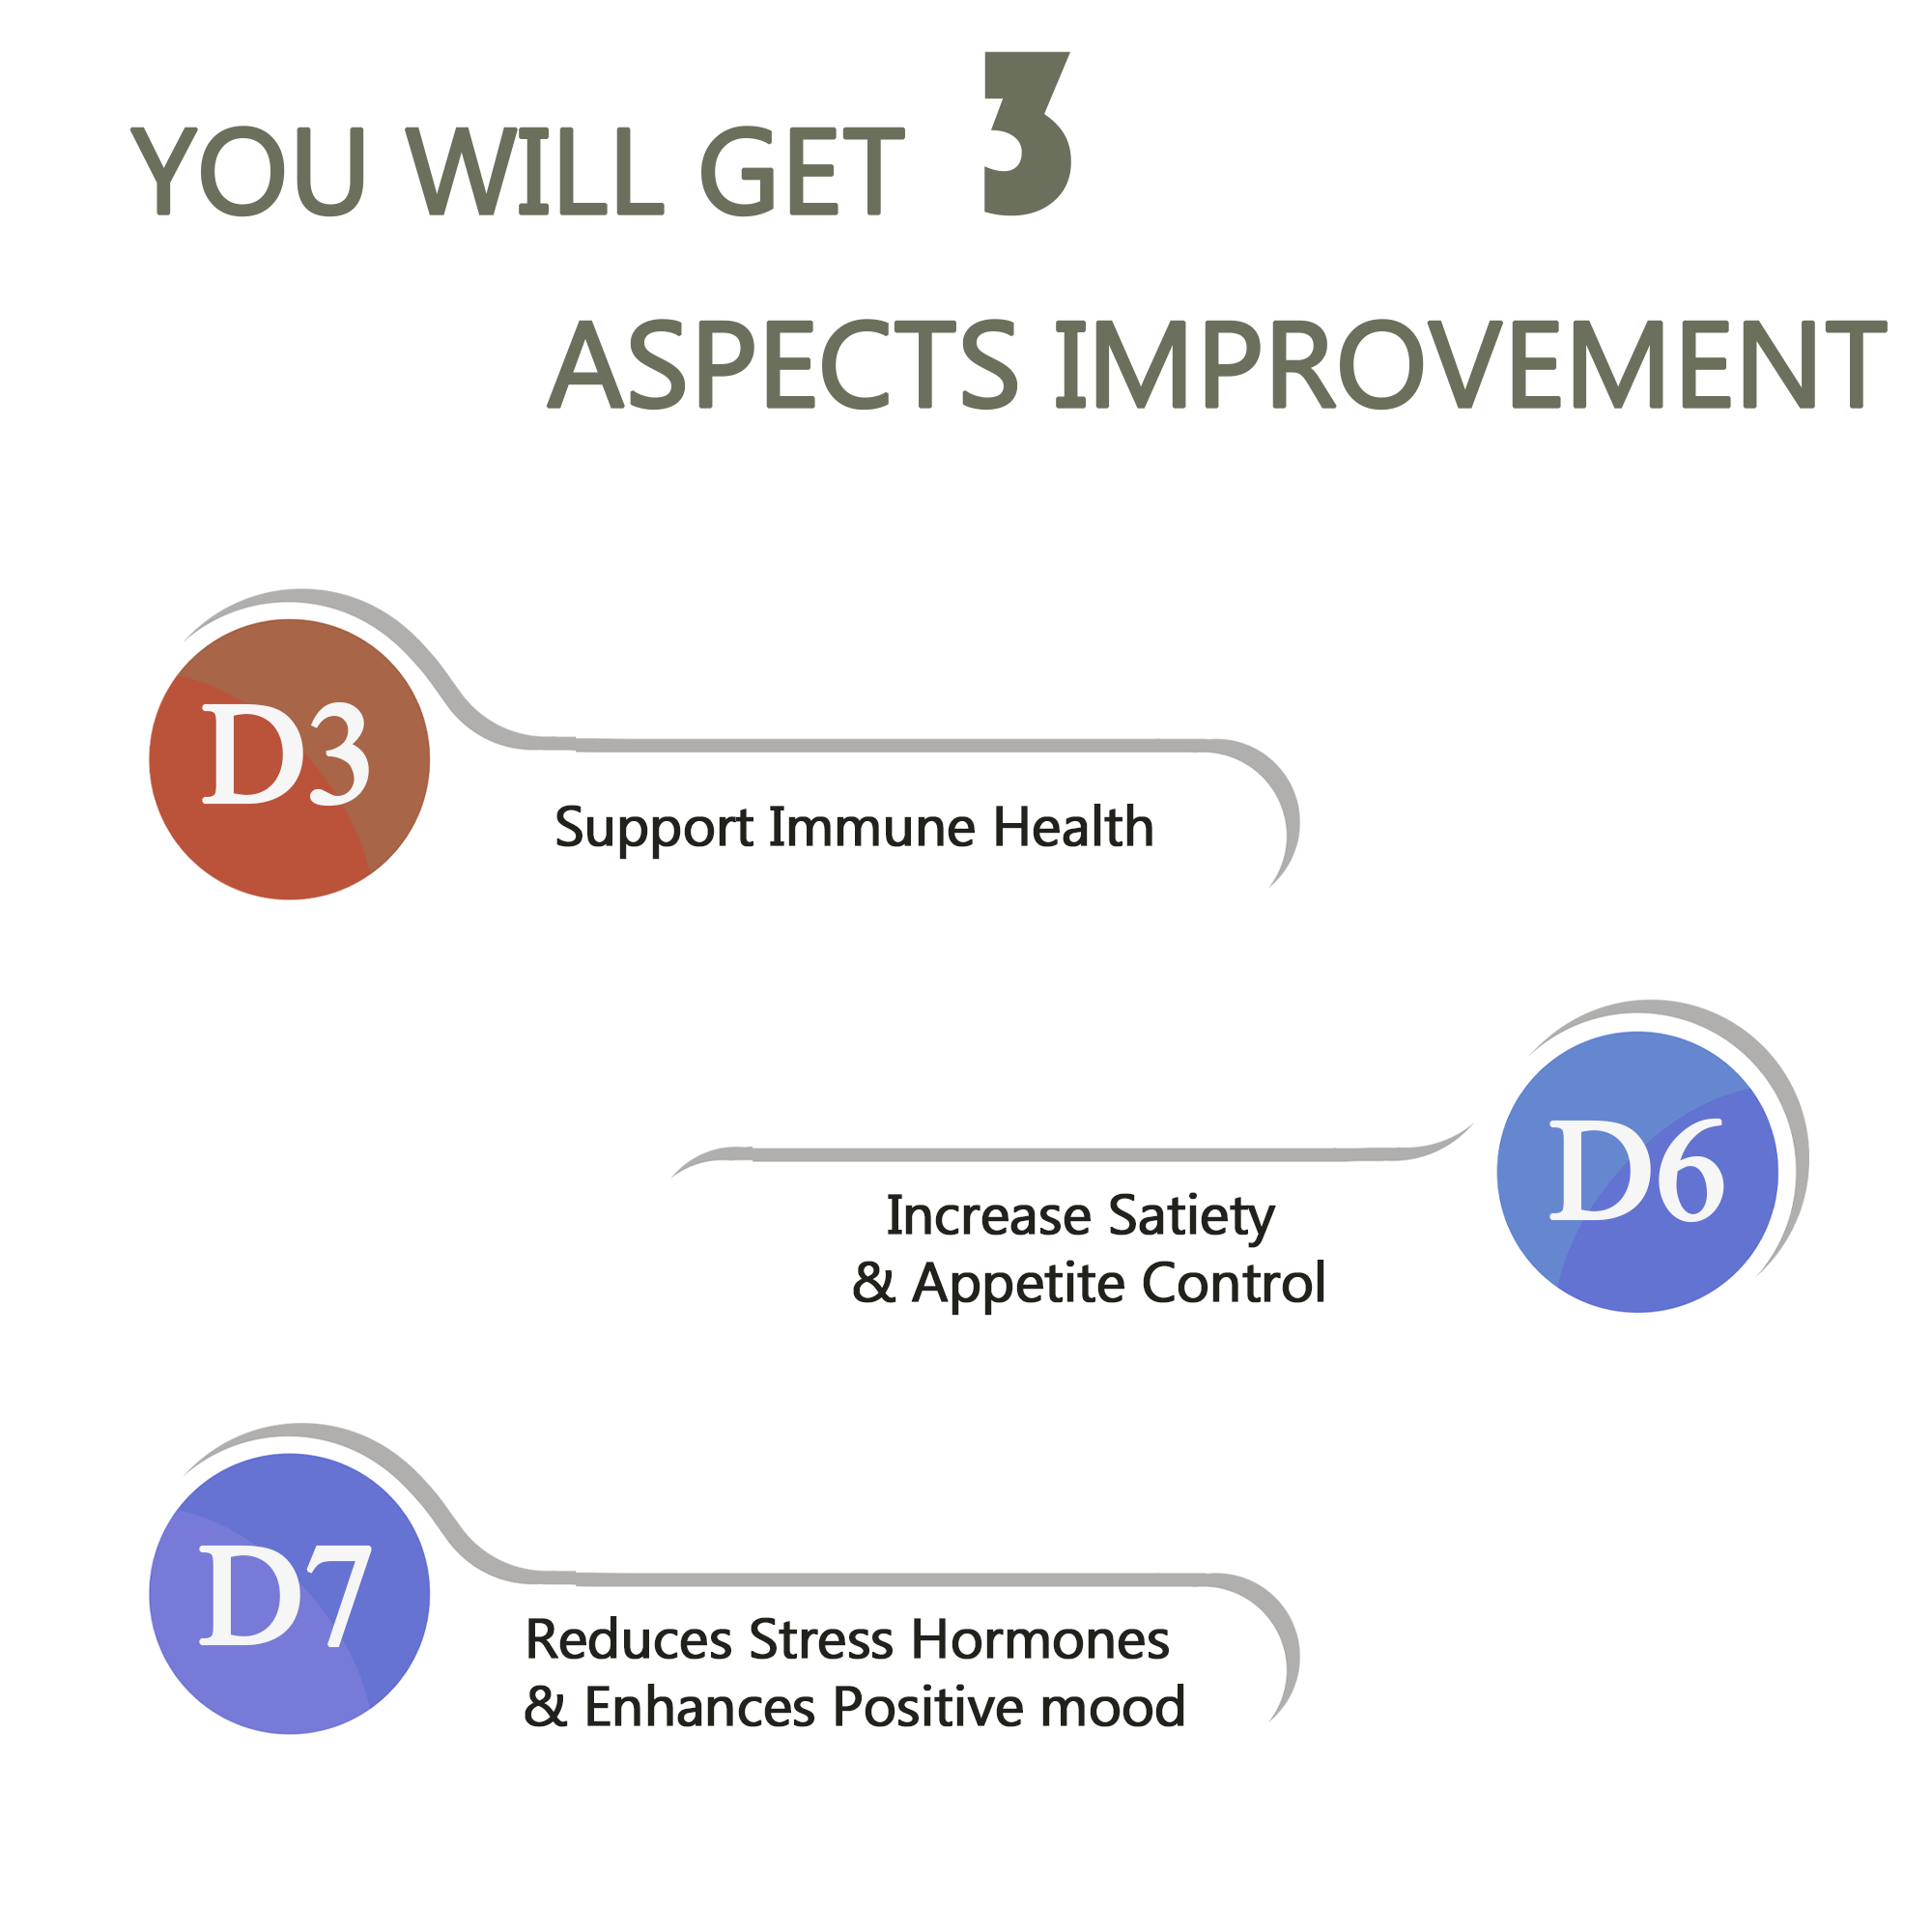 You will get 3 aspects improvement